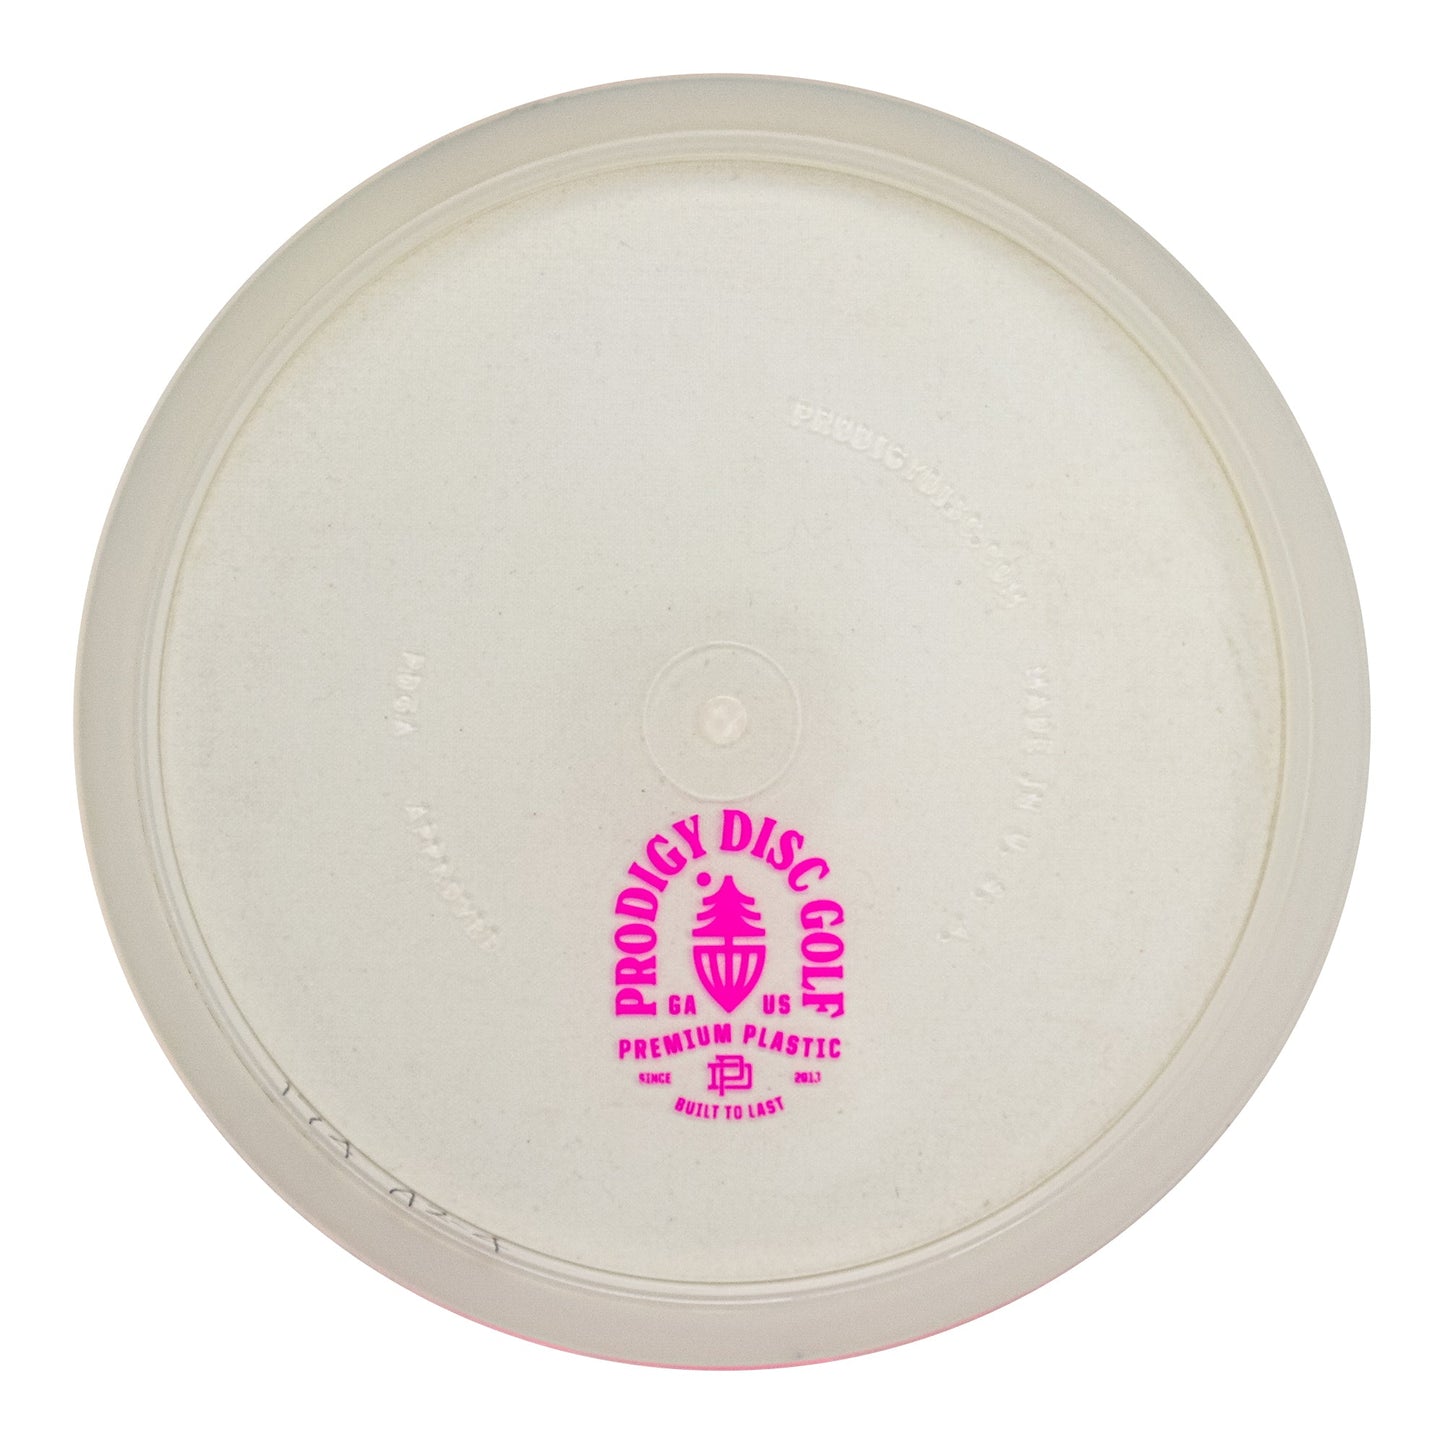 Prodigy A2 400 Plastic Approach Disc - Casual Crest Bottom Stamp (Ships Separately)